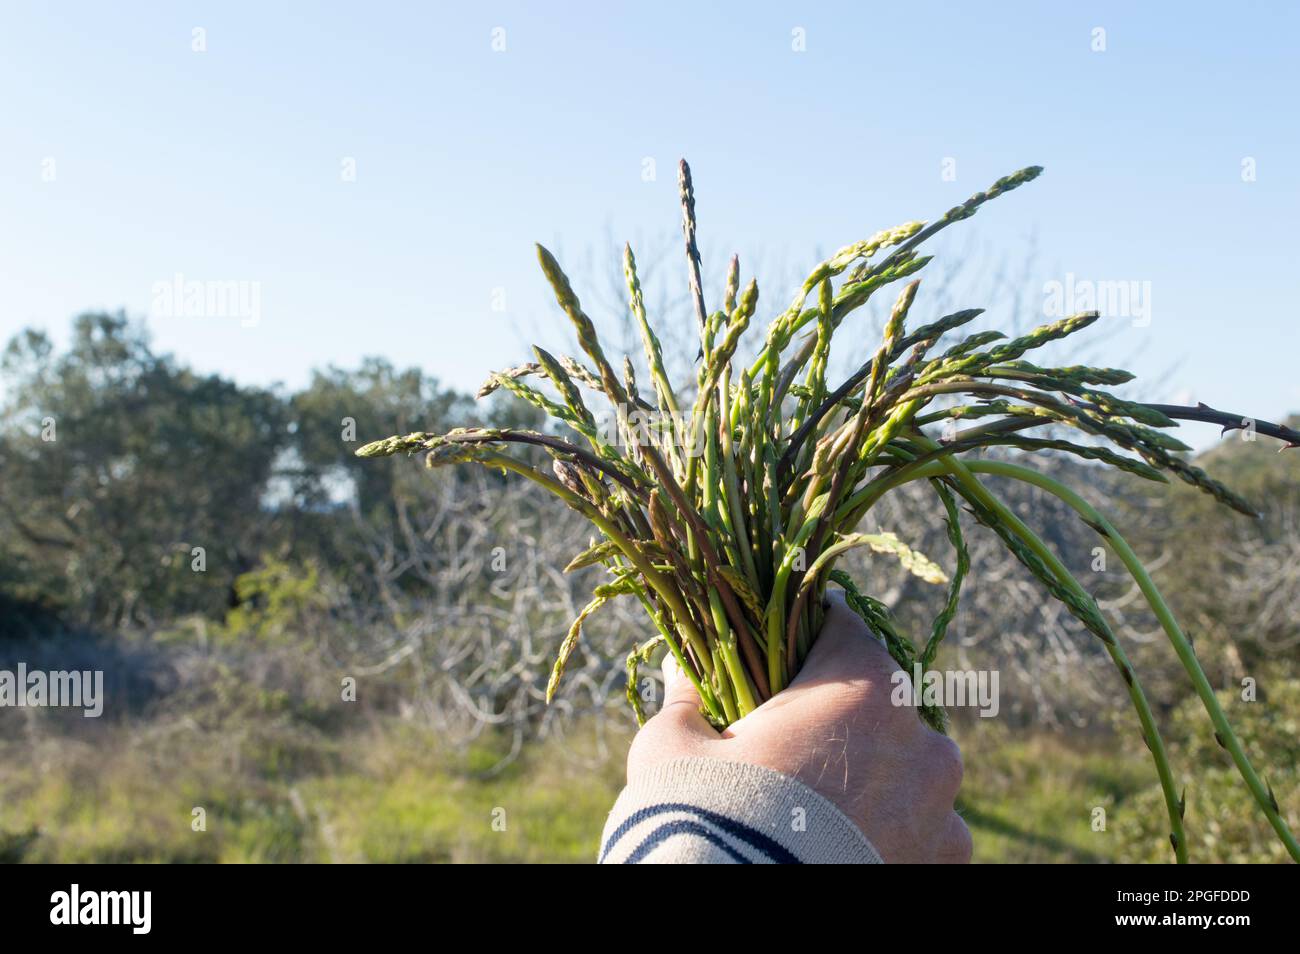 Bunch of wild asparagus in the hand, picked up in the forest during springtime in Dalmatia Stock Photo